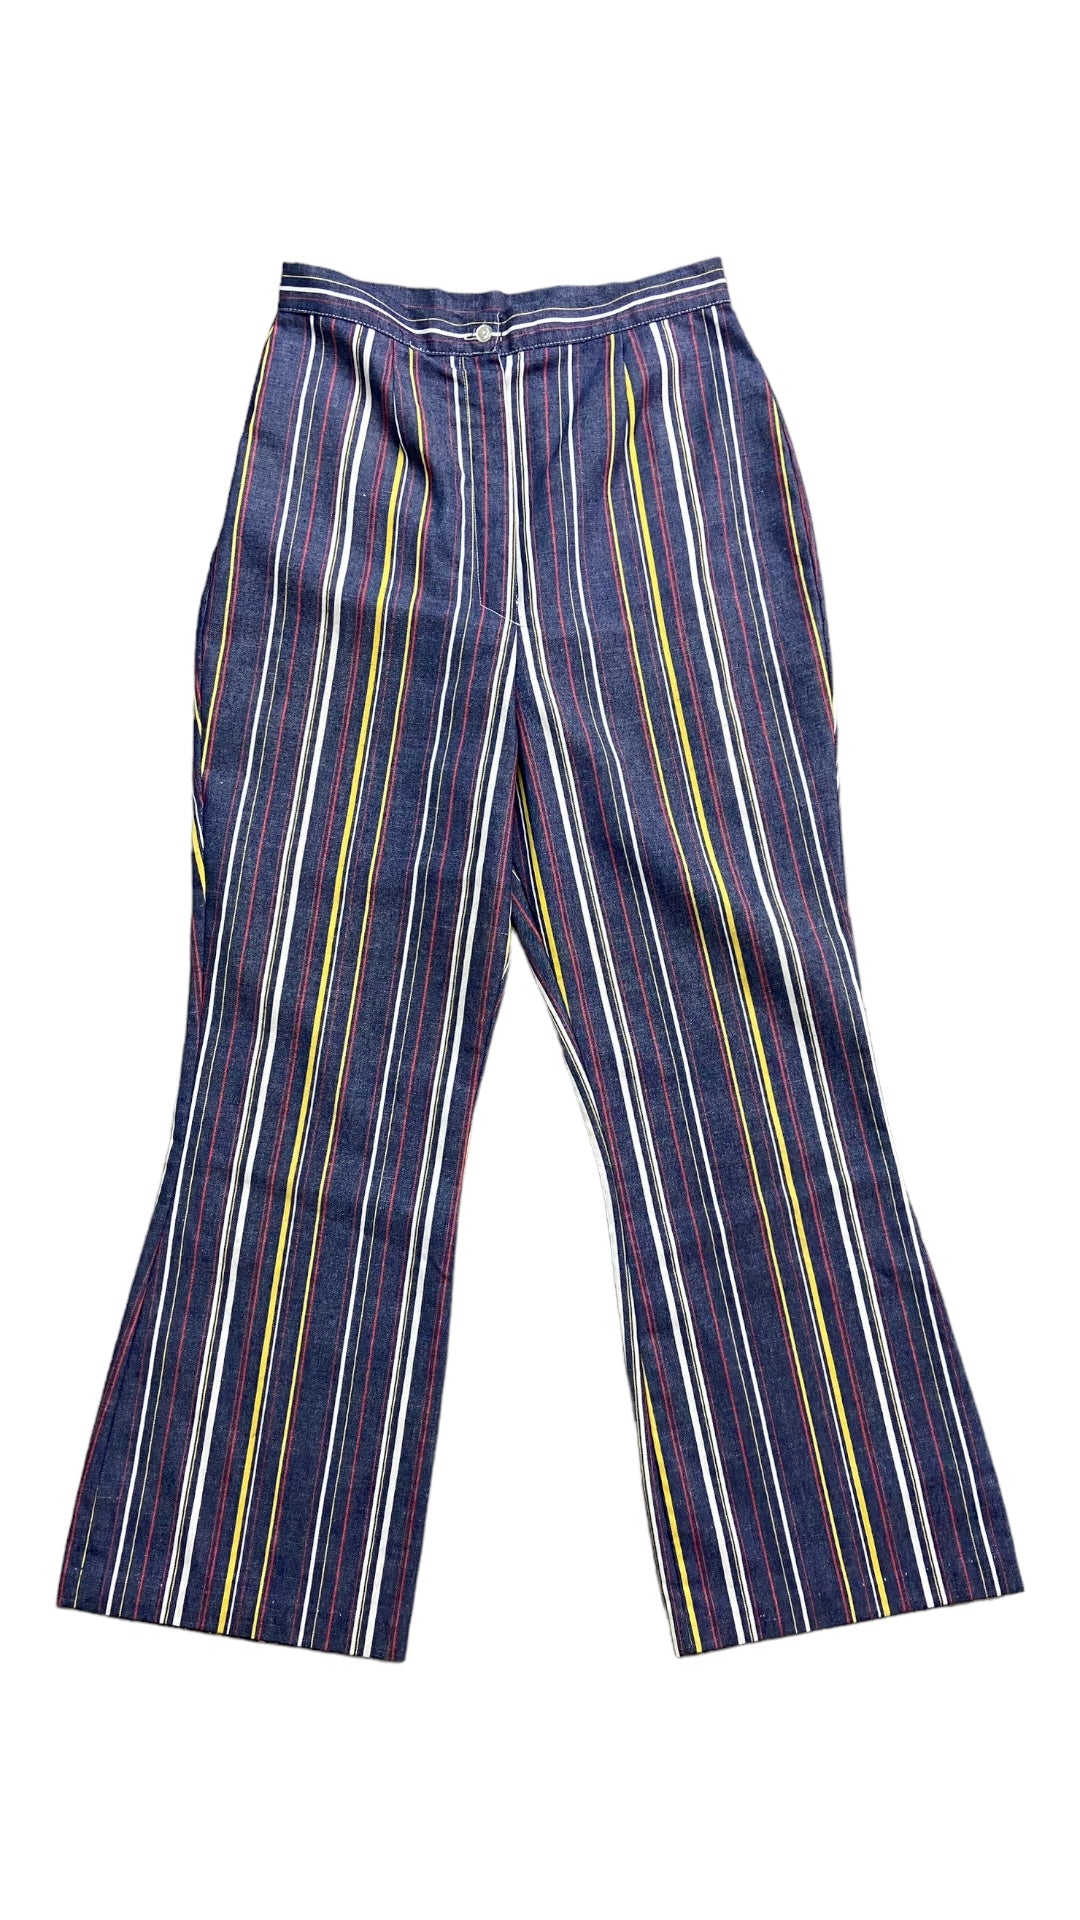 VTG Primary Color Stripped Pants SZ 28x29